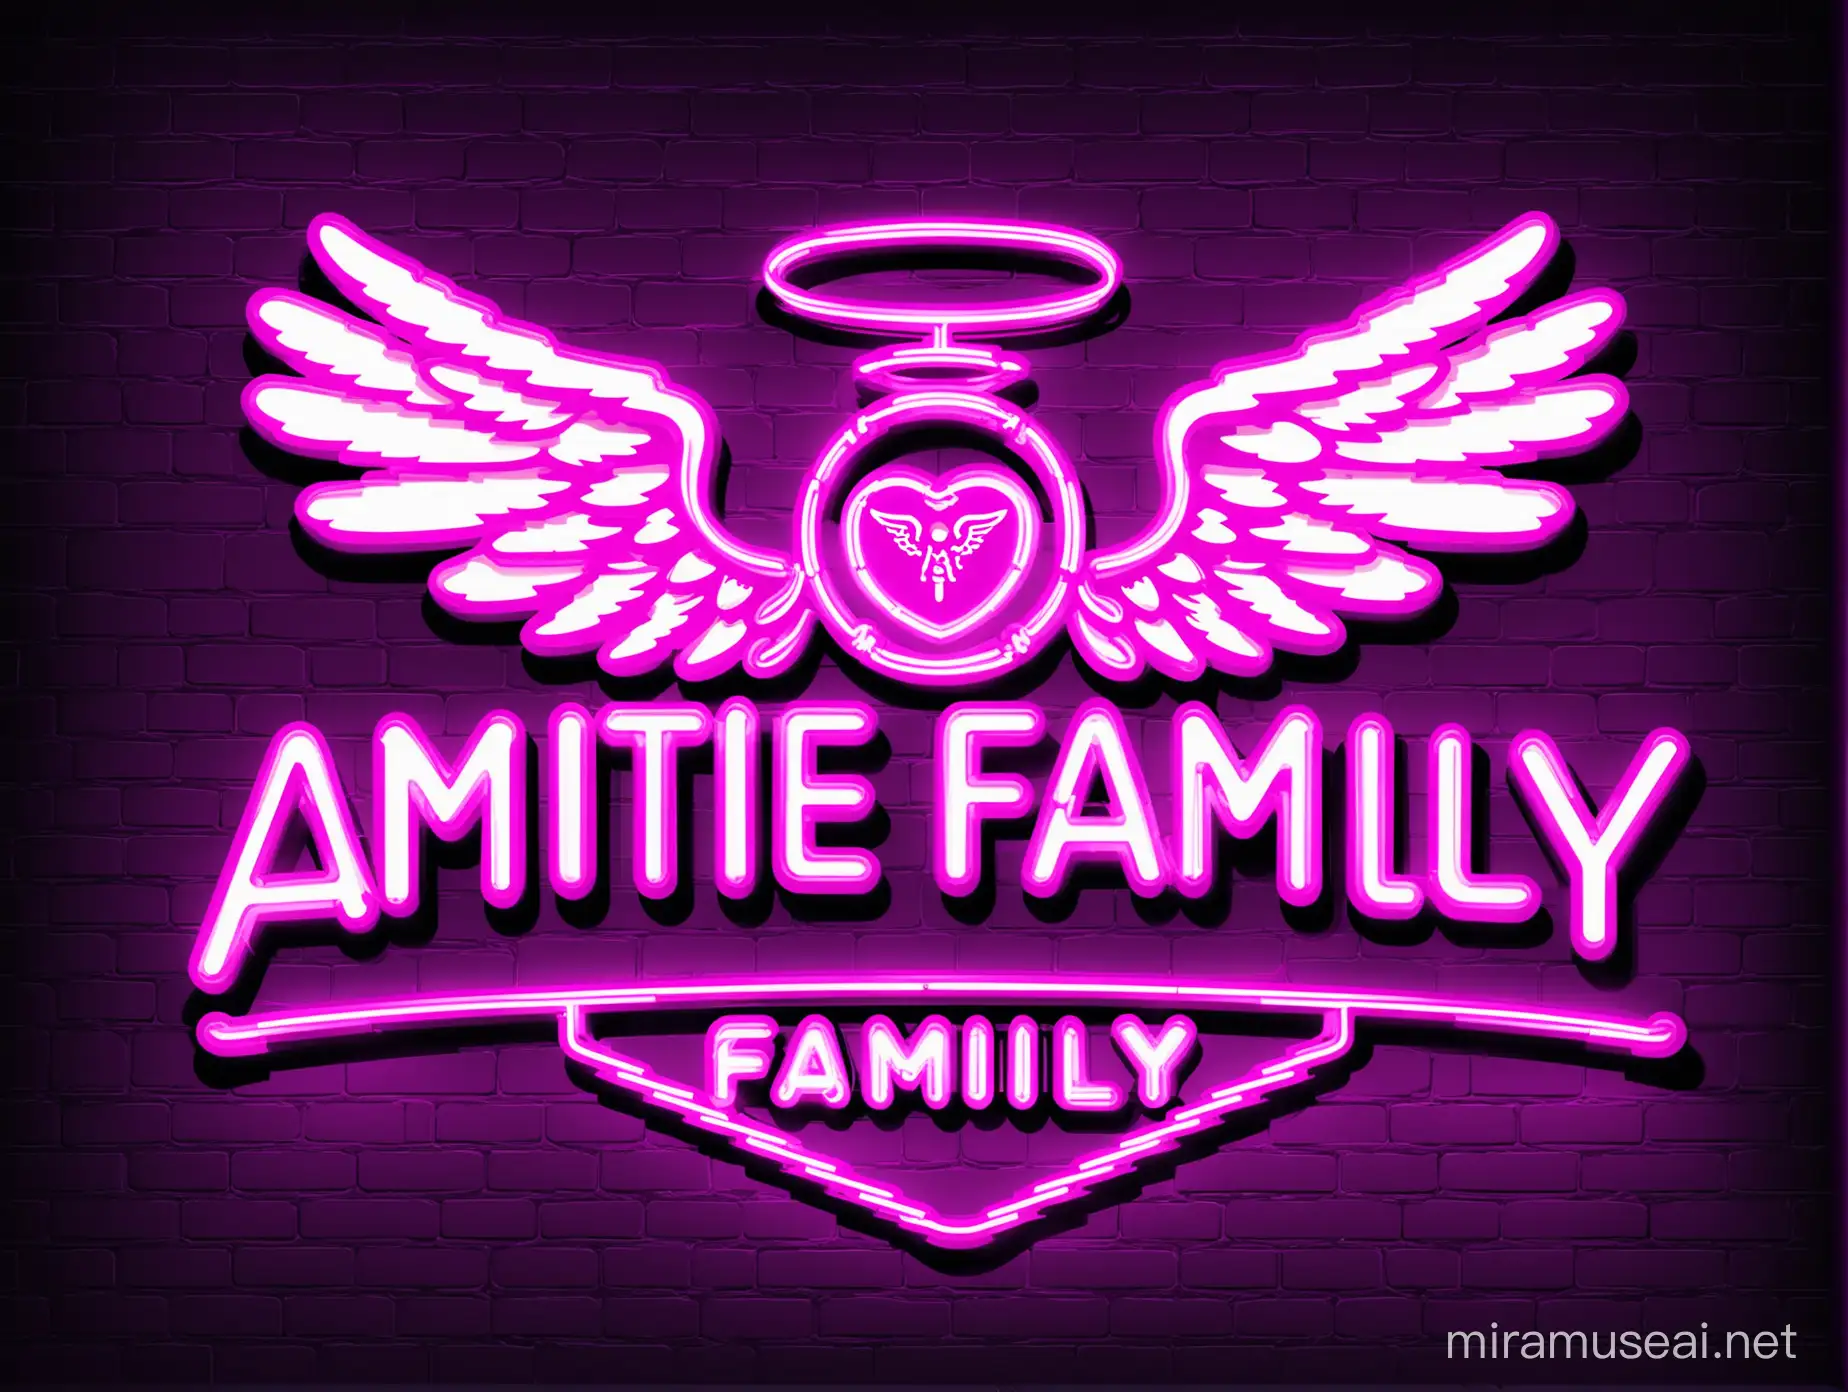 luxury neon logo sign. large and bulky.Text Just "AMITIE FAMILY".  emblem, very intricately and microscopically detailed. the color scheme is magenta, light white, chromatic, baby blue. Angel wings in the background.